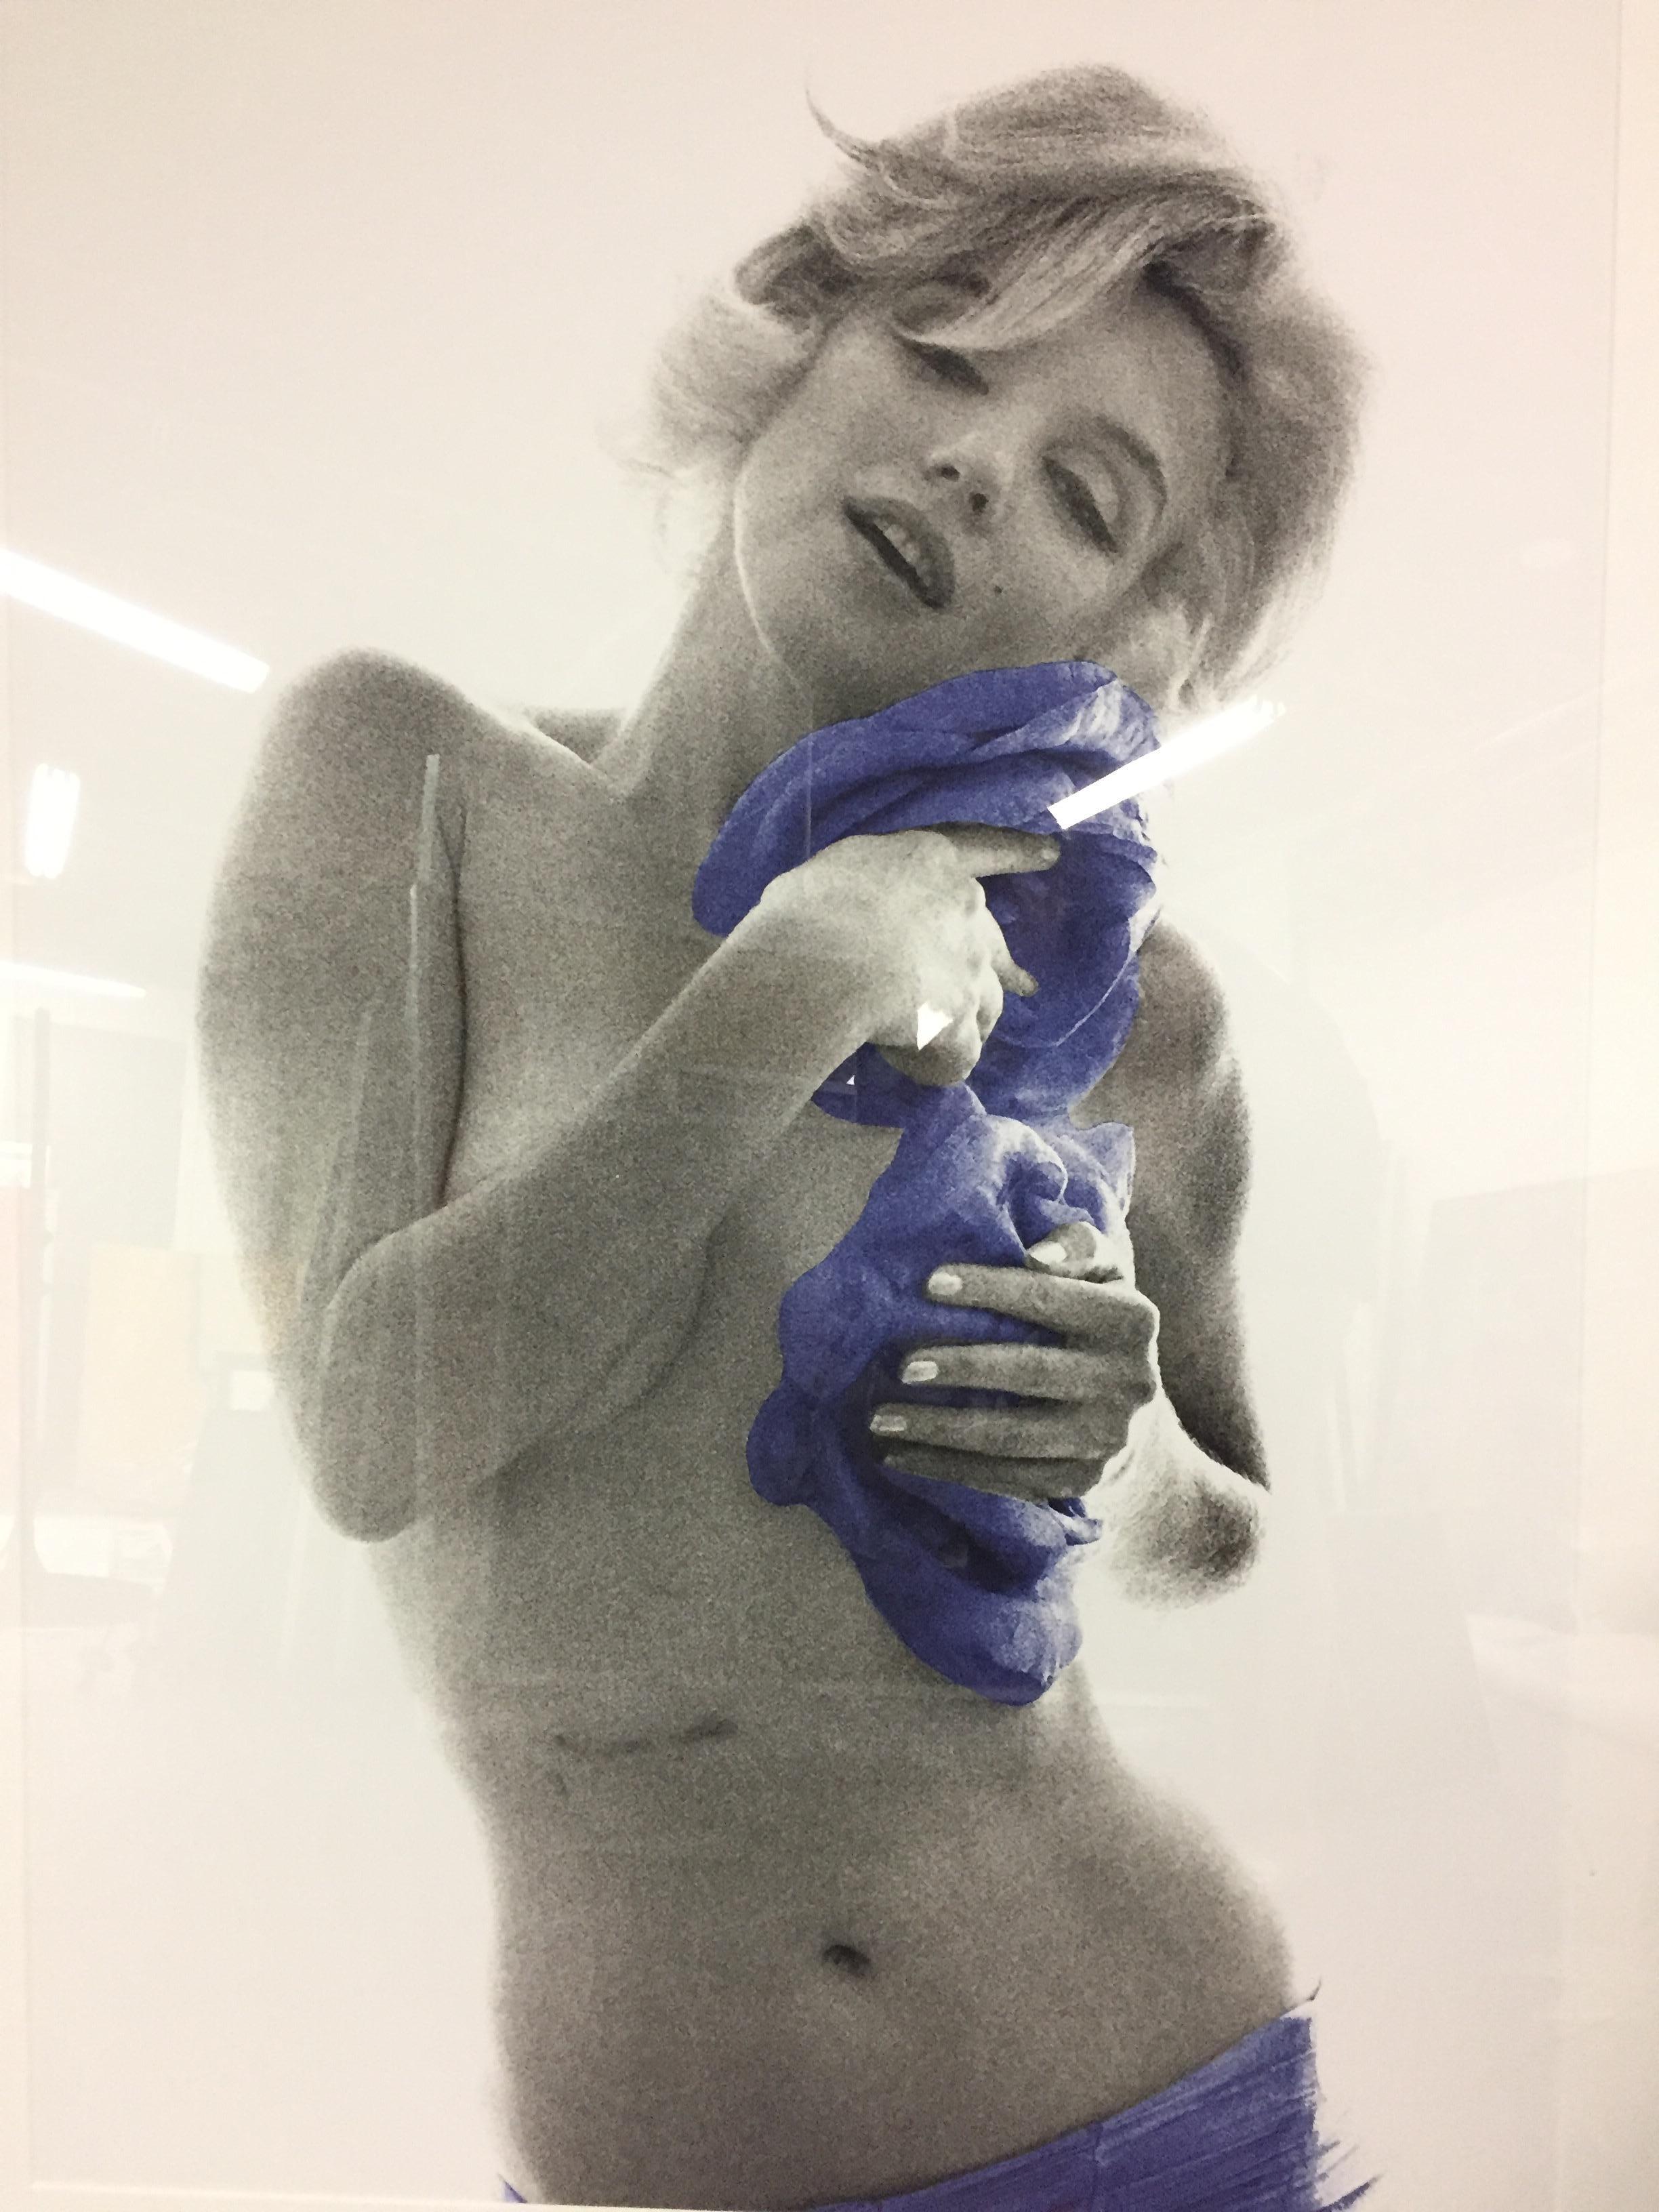 Bert Stern Portrait Photograph - Marilyn Monroe with Blue Roses (from The Last Sitting, Vogue), 1962